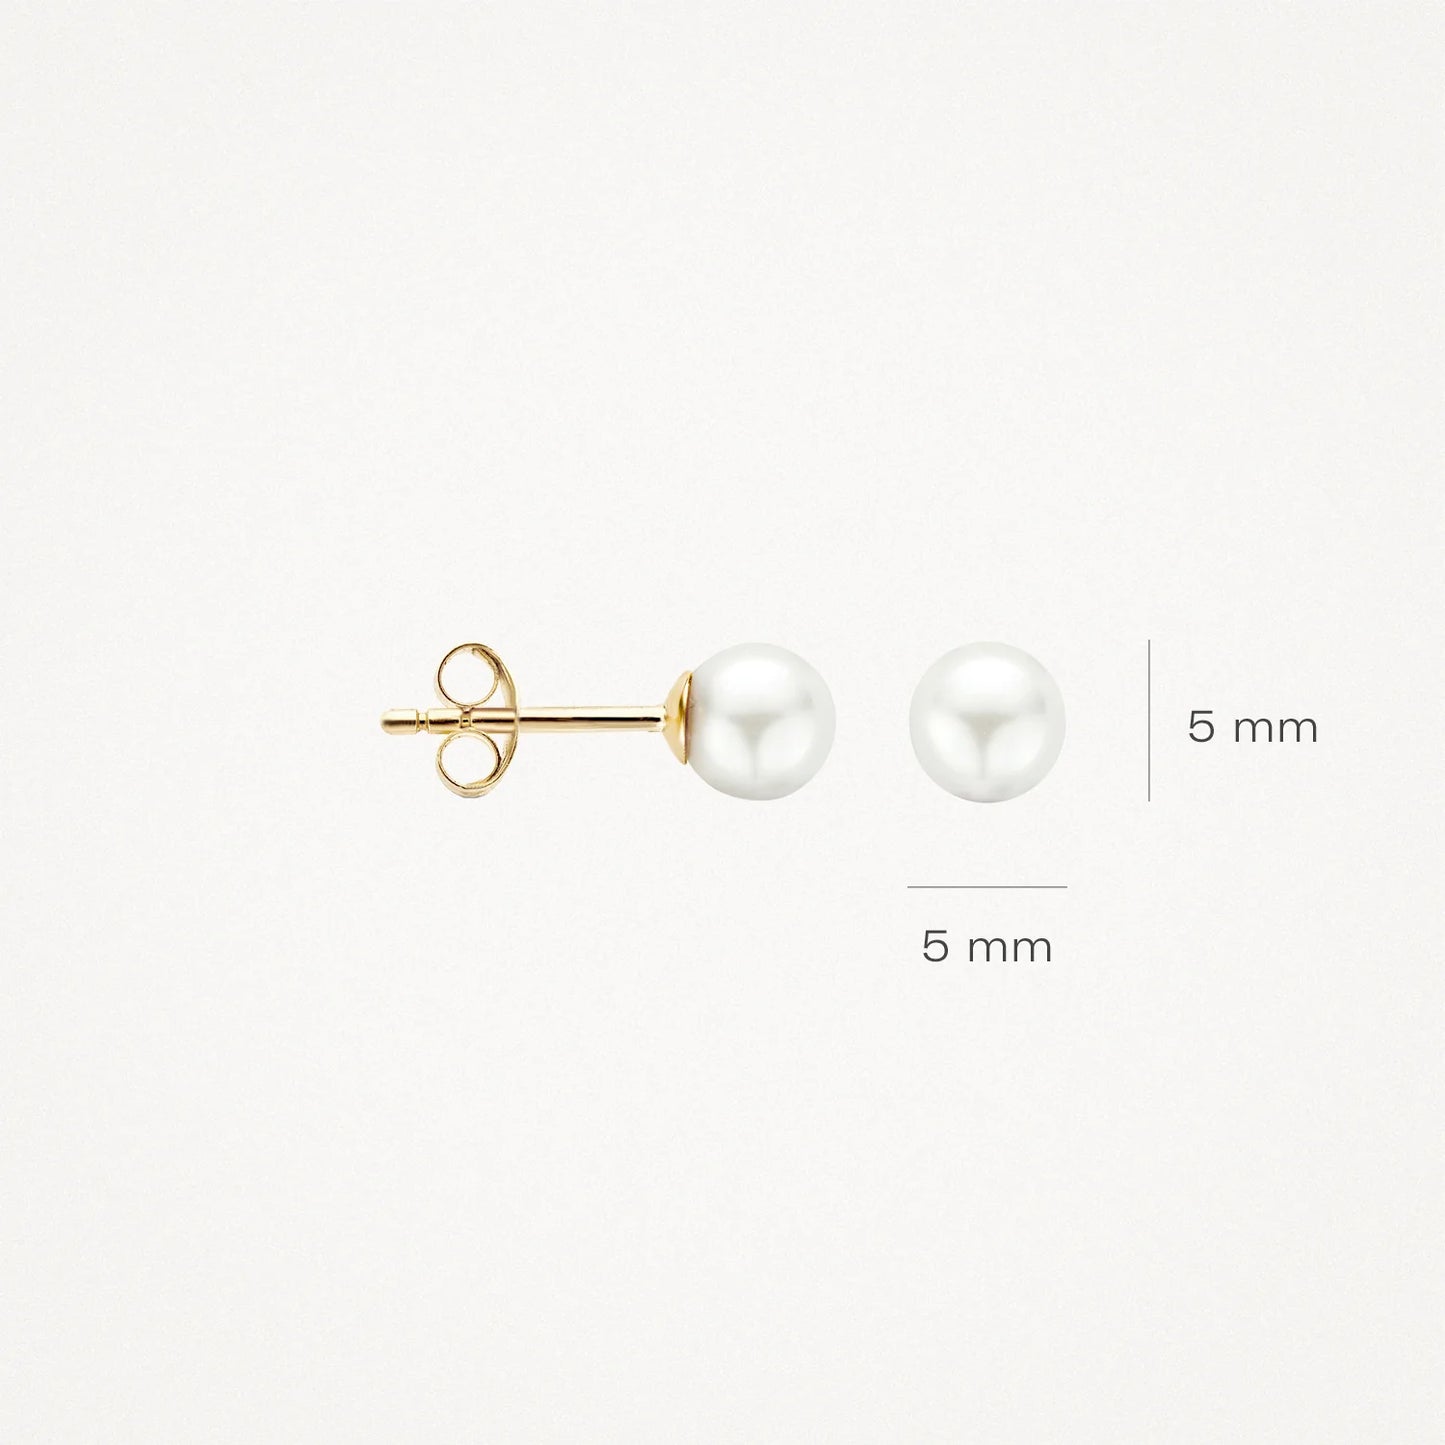 Blush Earrings 7149YPW - 14k Yellow gold with 5mm freshwater pearl